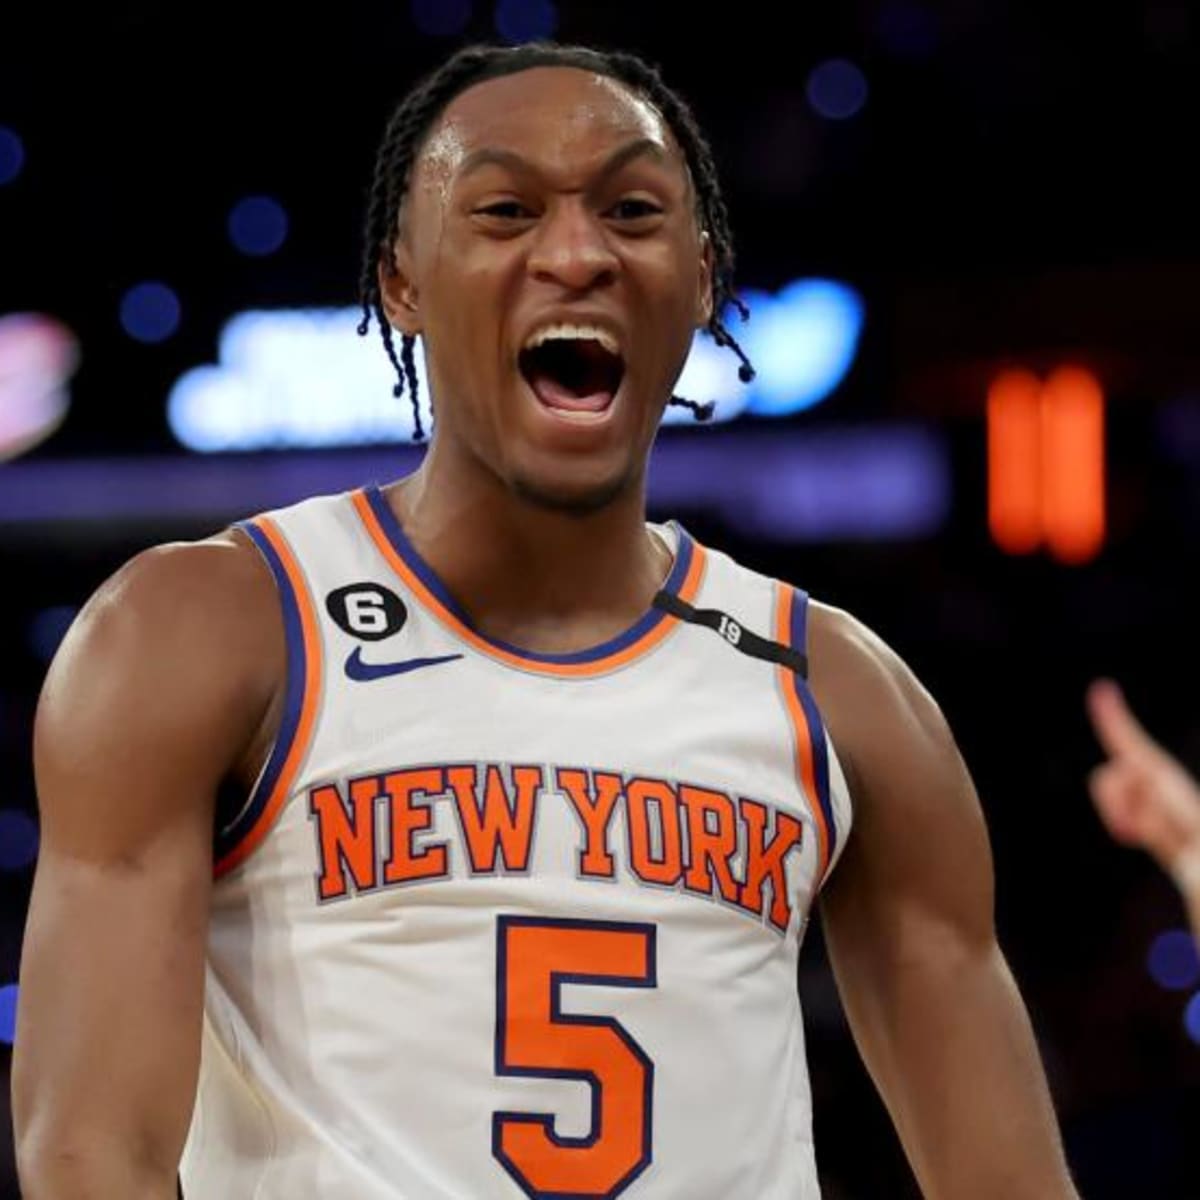 Breaking down the game of Knicks rookie guard Immanuel Quickley